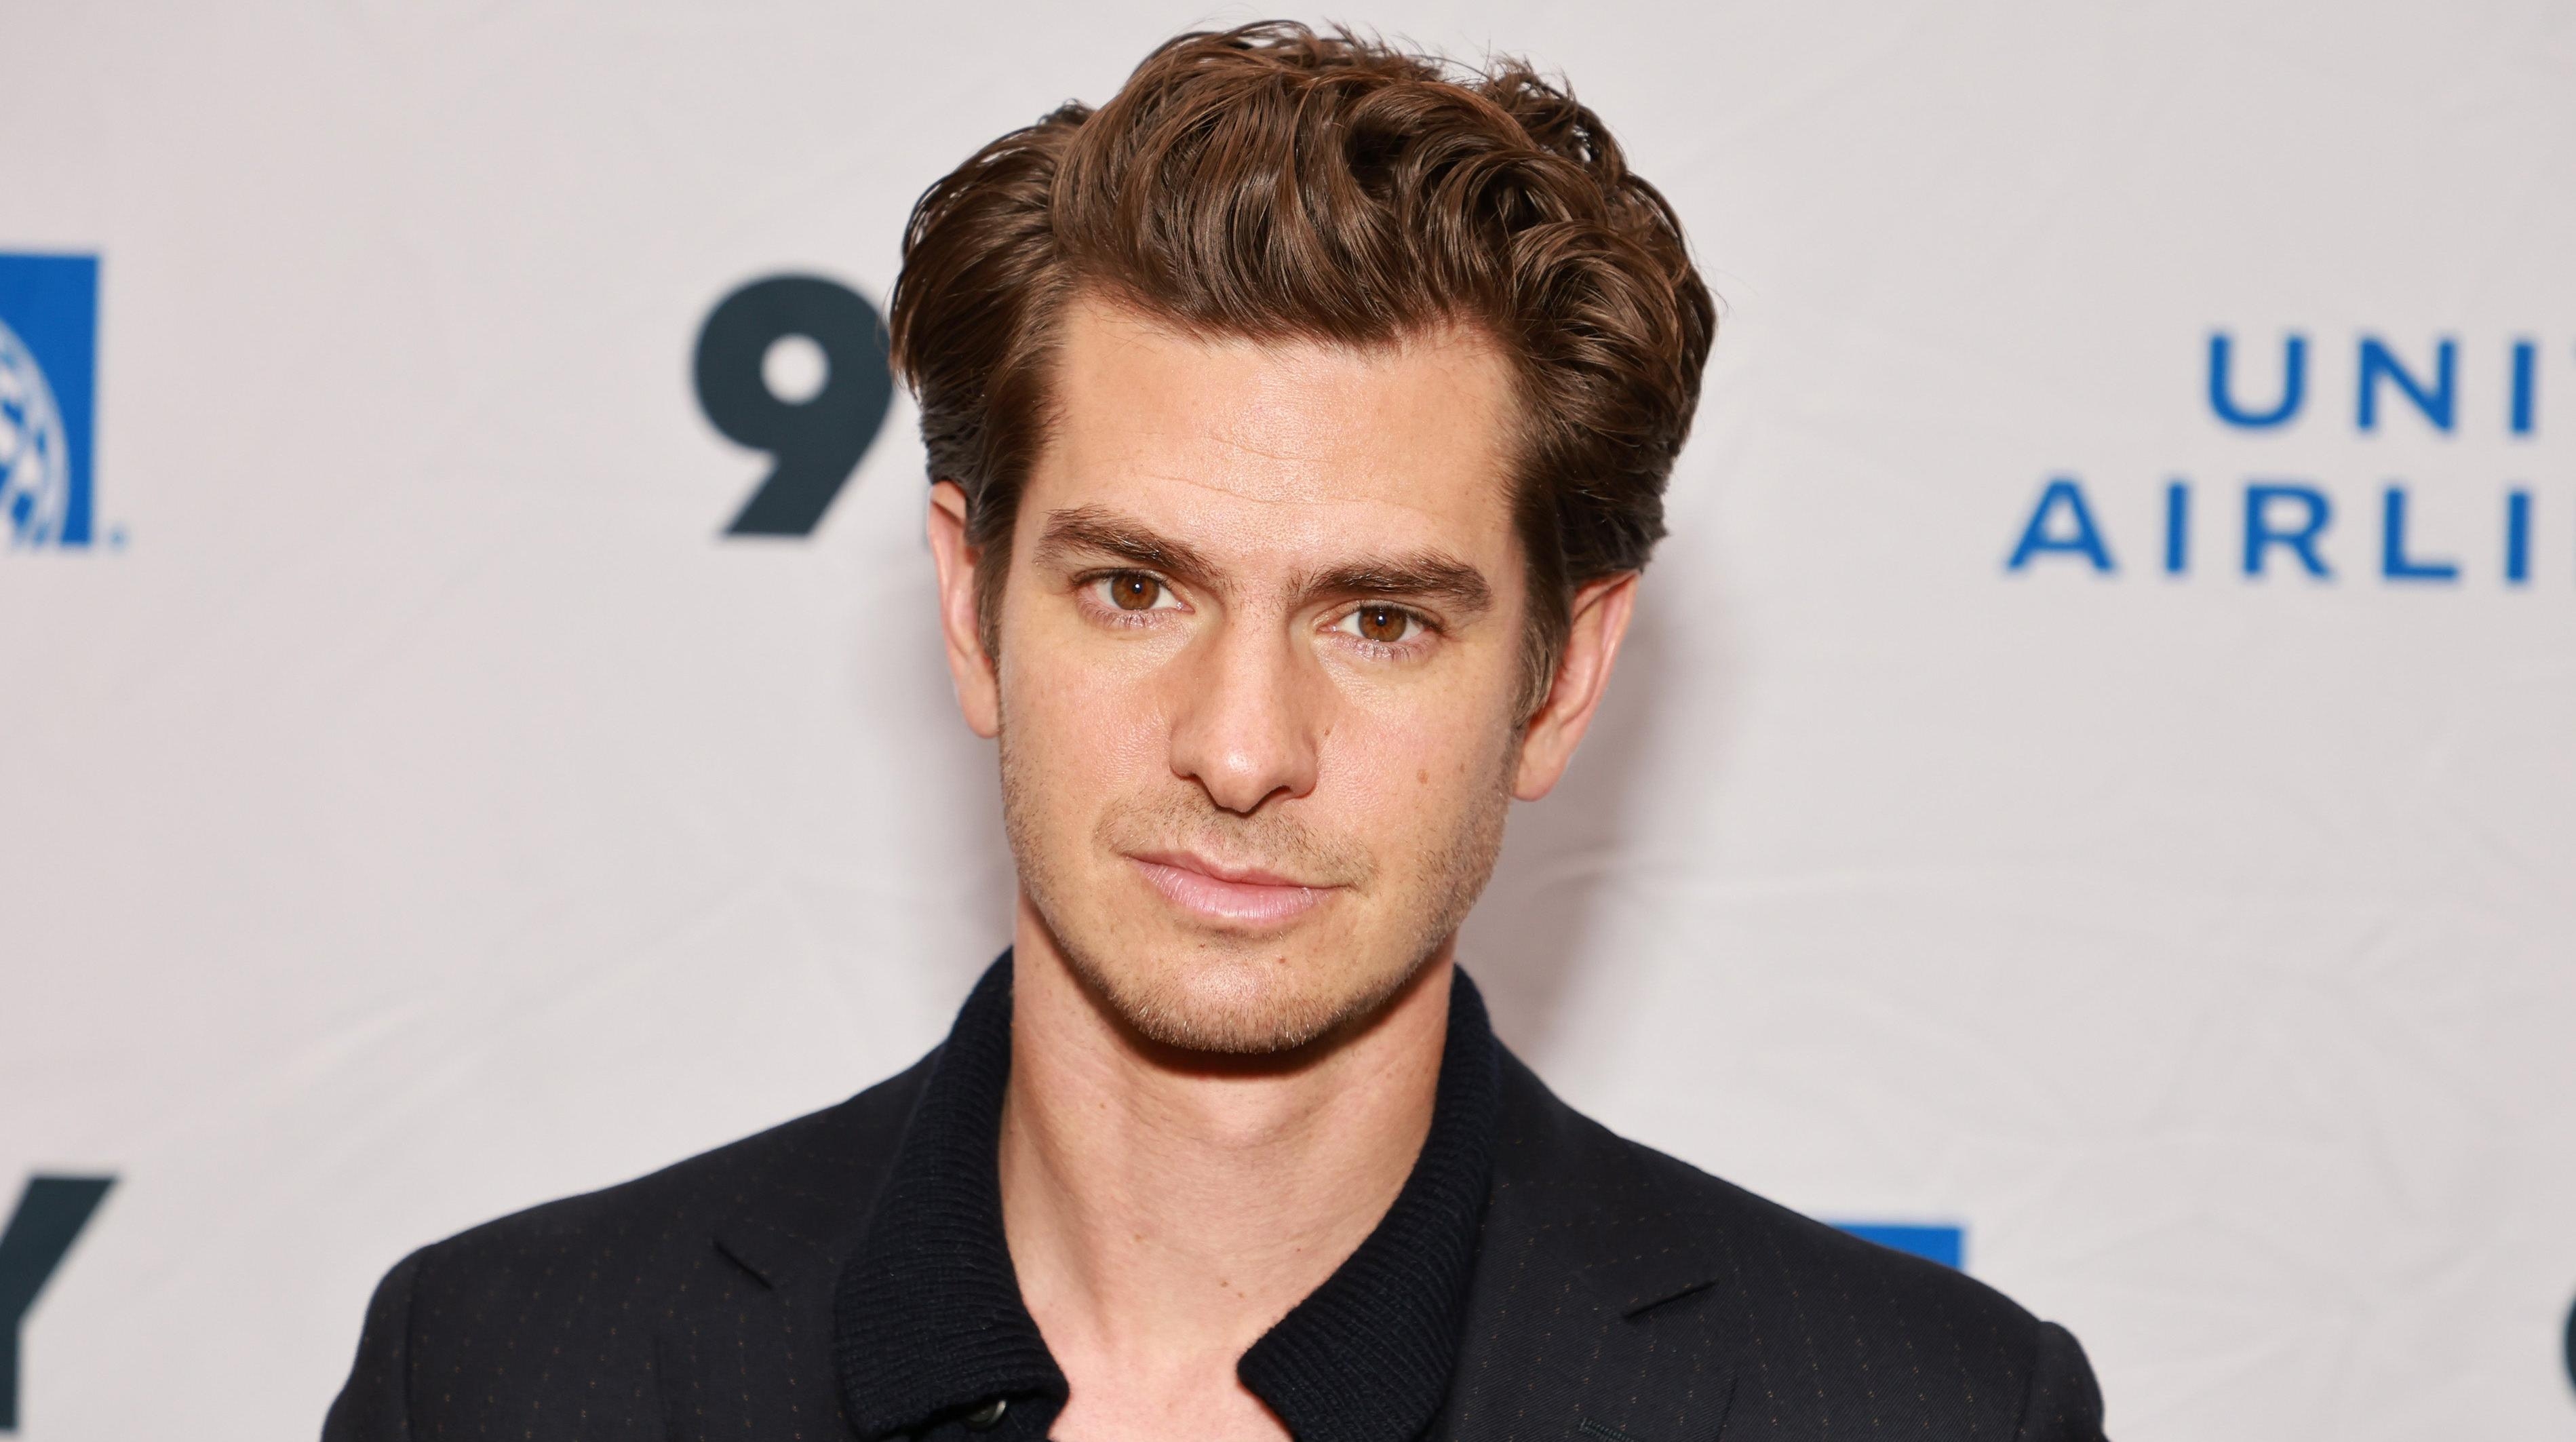 Andrew Garfield, who is totally credible, says he has “no plans” to don the Spidey suit again